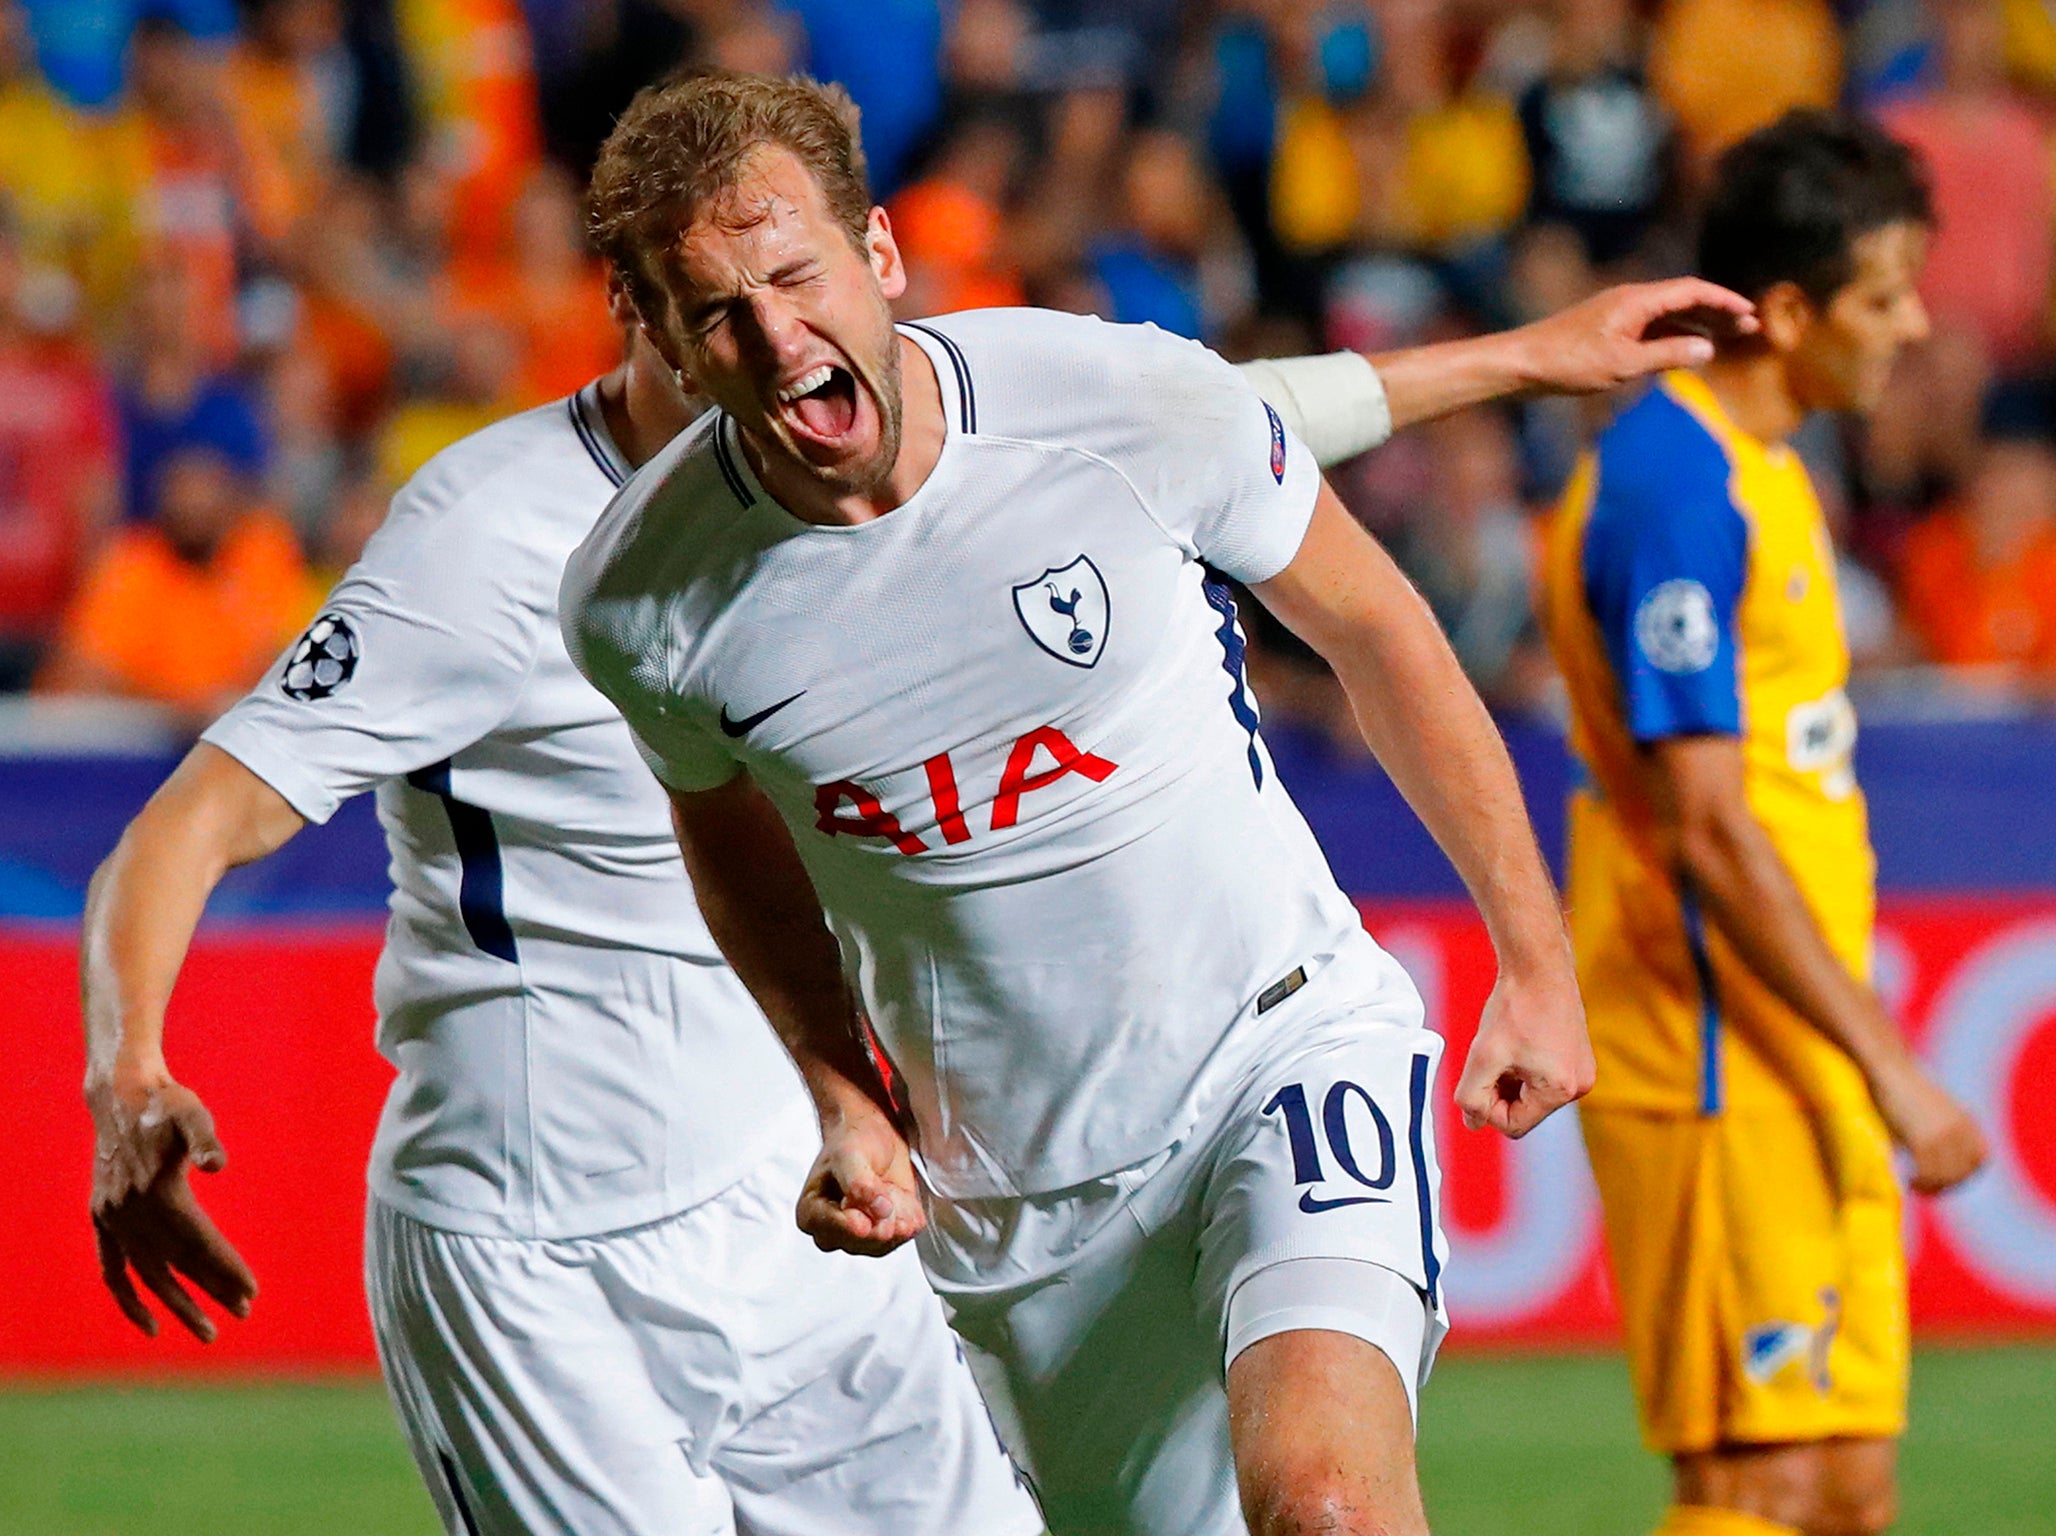 Kane is now the top-scoring player in the Champions League this season